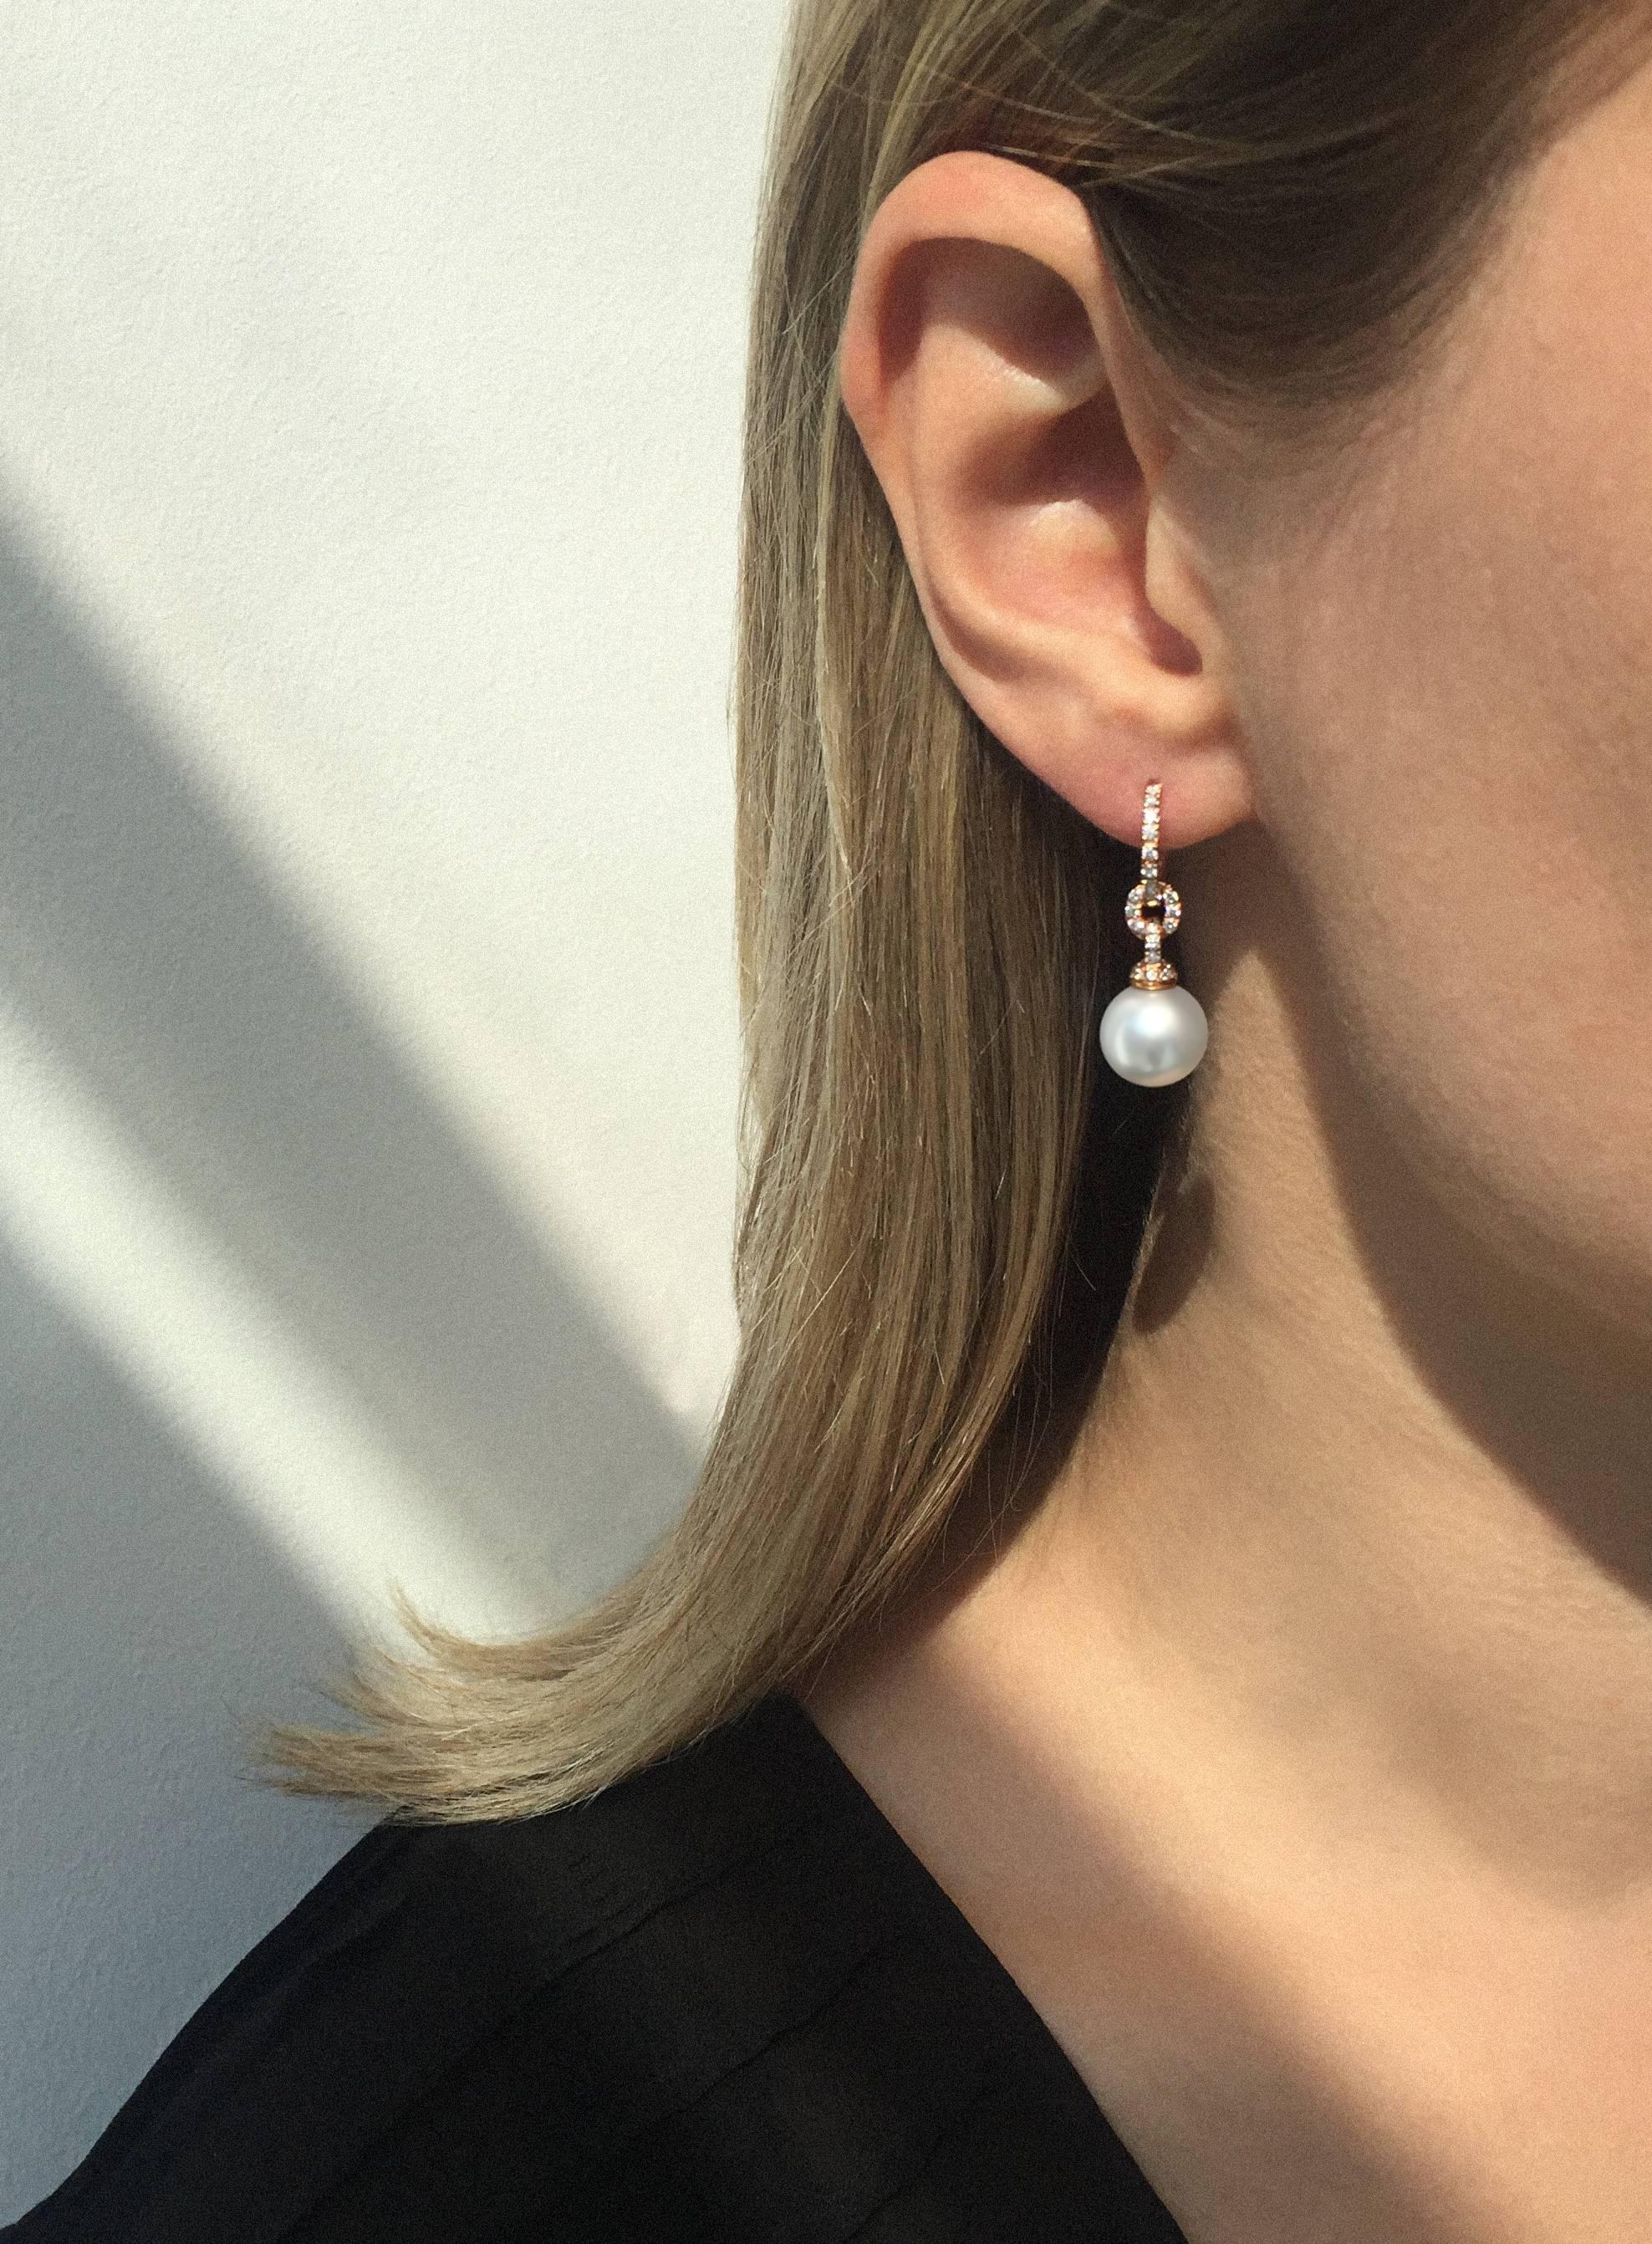 Two spectacular South Sea Pearls, hand selected for their cool lustre and even shape, have been suspended from a Diamond set hoop fitting. The hoop feature gives flexibility to the wearer, allowing them to remove the pearl for an understated elegant